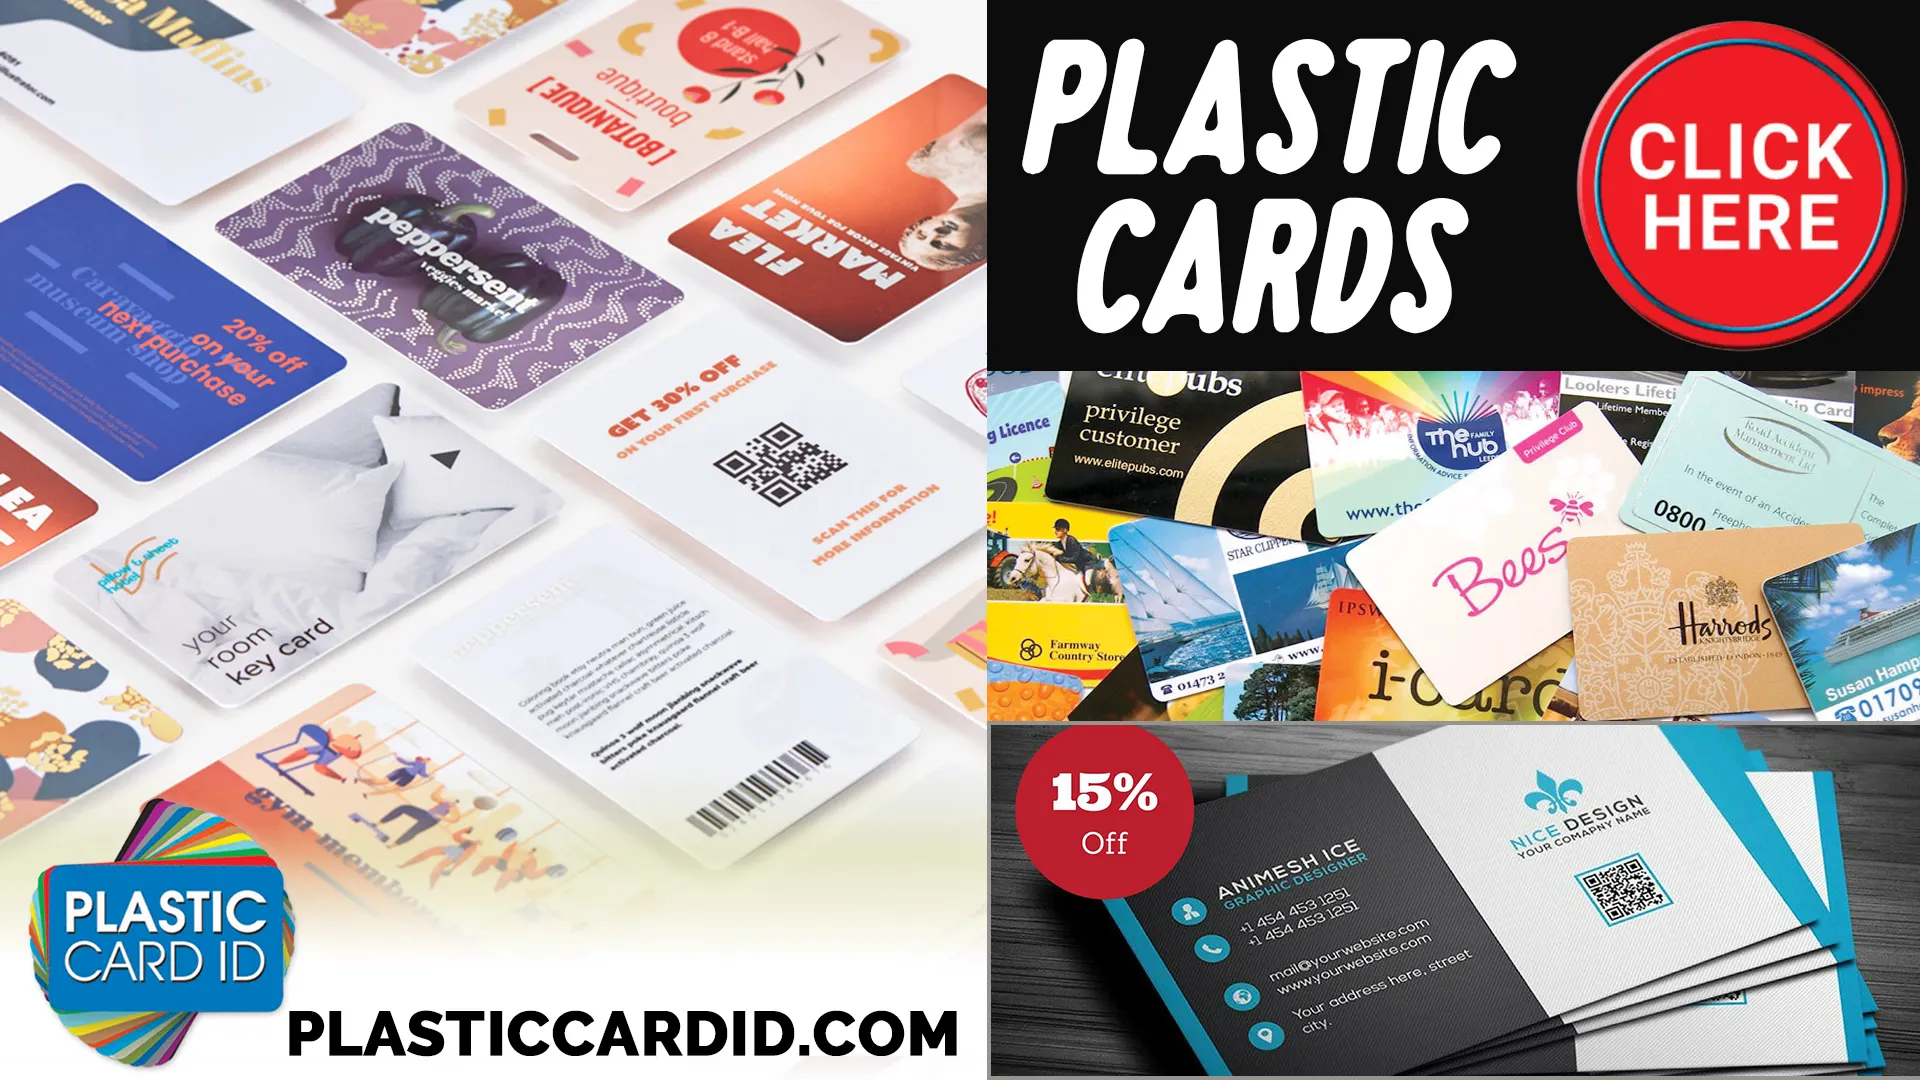 Stay Vibrant and Unfazed by the Weather with Our Plastic Cards